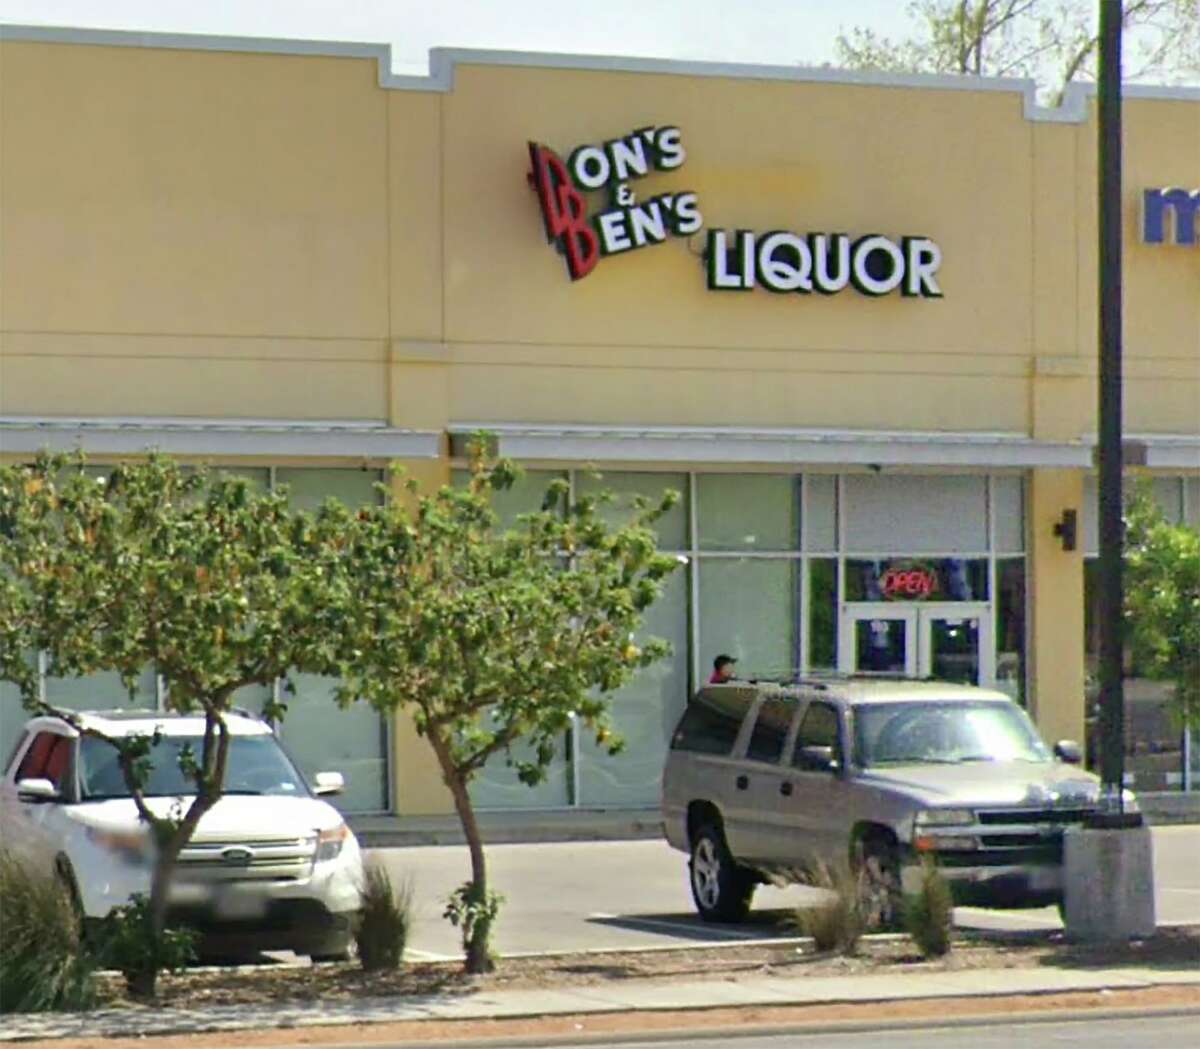 The owners of Gabriel Investment Group, which owns the Don’s & Ben’s Liquor store at 810 S. Gen. McMullen Drive, on Friday won a court victory in its battle with the Texas Alcoholic Beverage Commission.